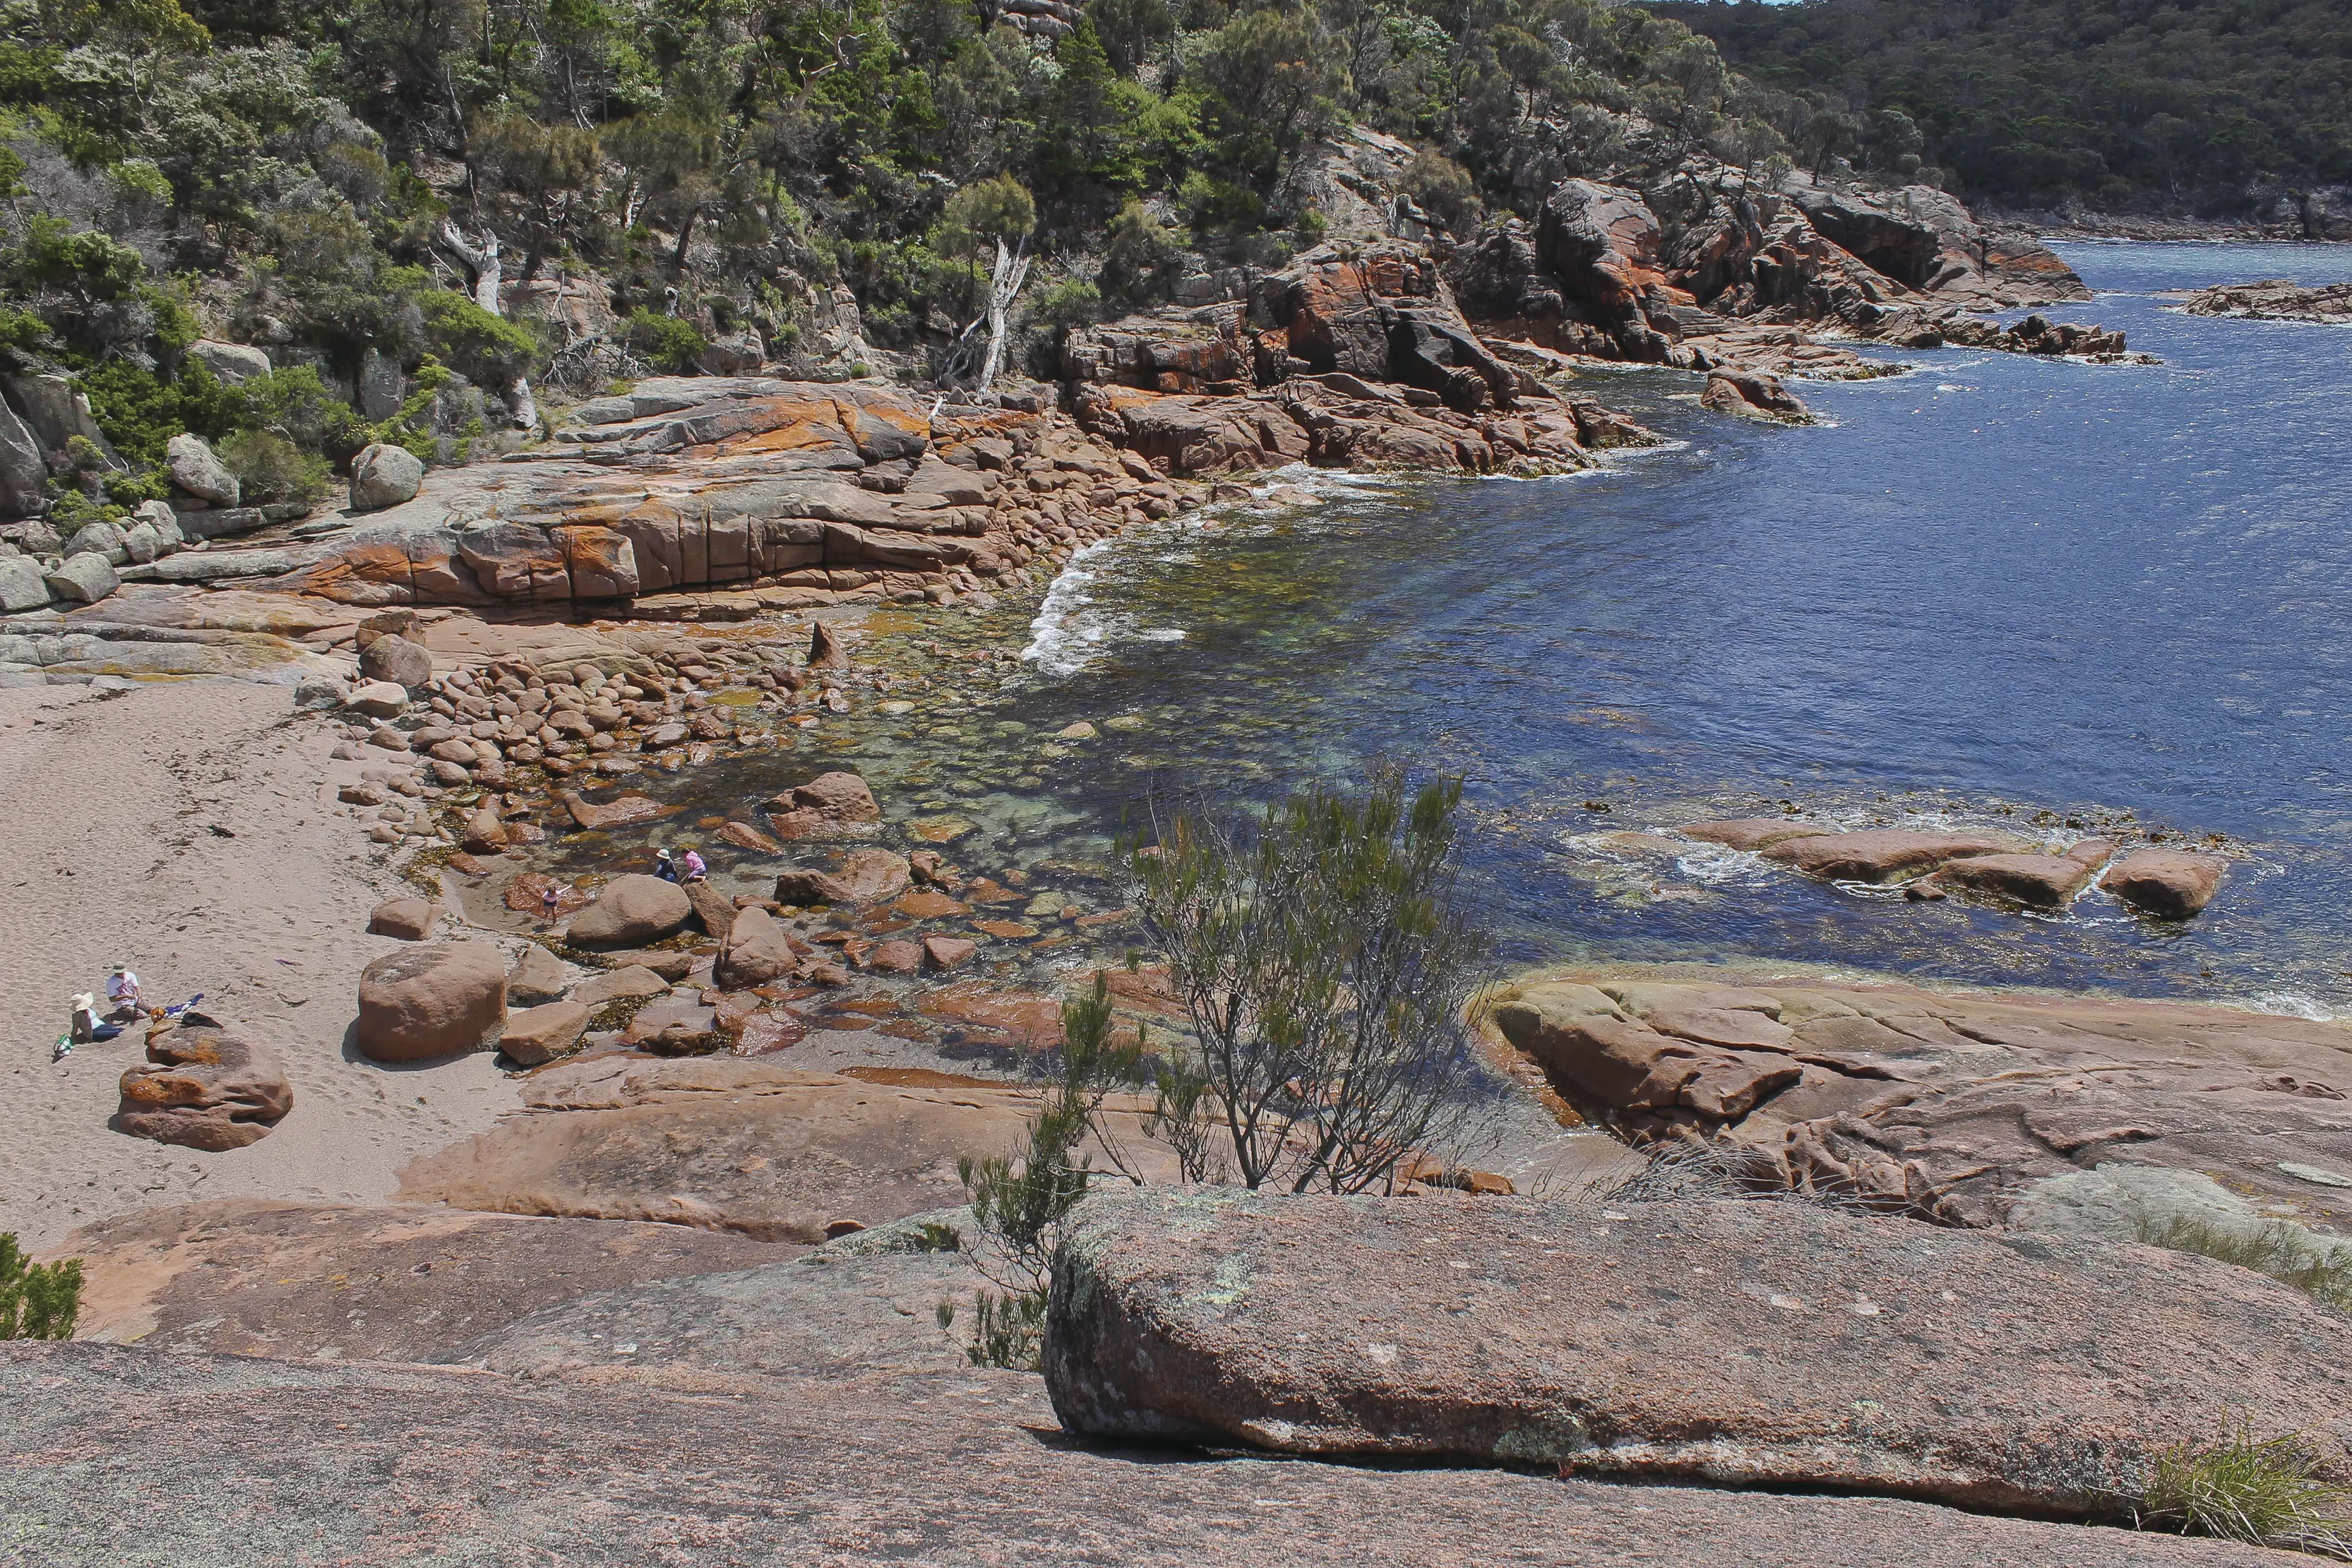 Low level shot of Sleepy Bay in Freycinet National Park, Freycinet Peninsula. Brown and re rocks surrounded by greenery. 